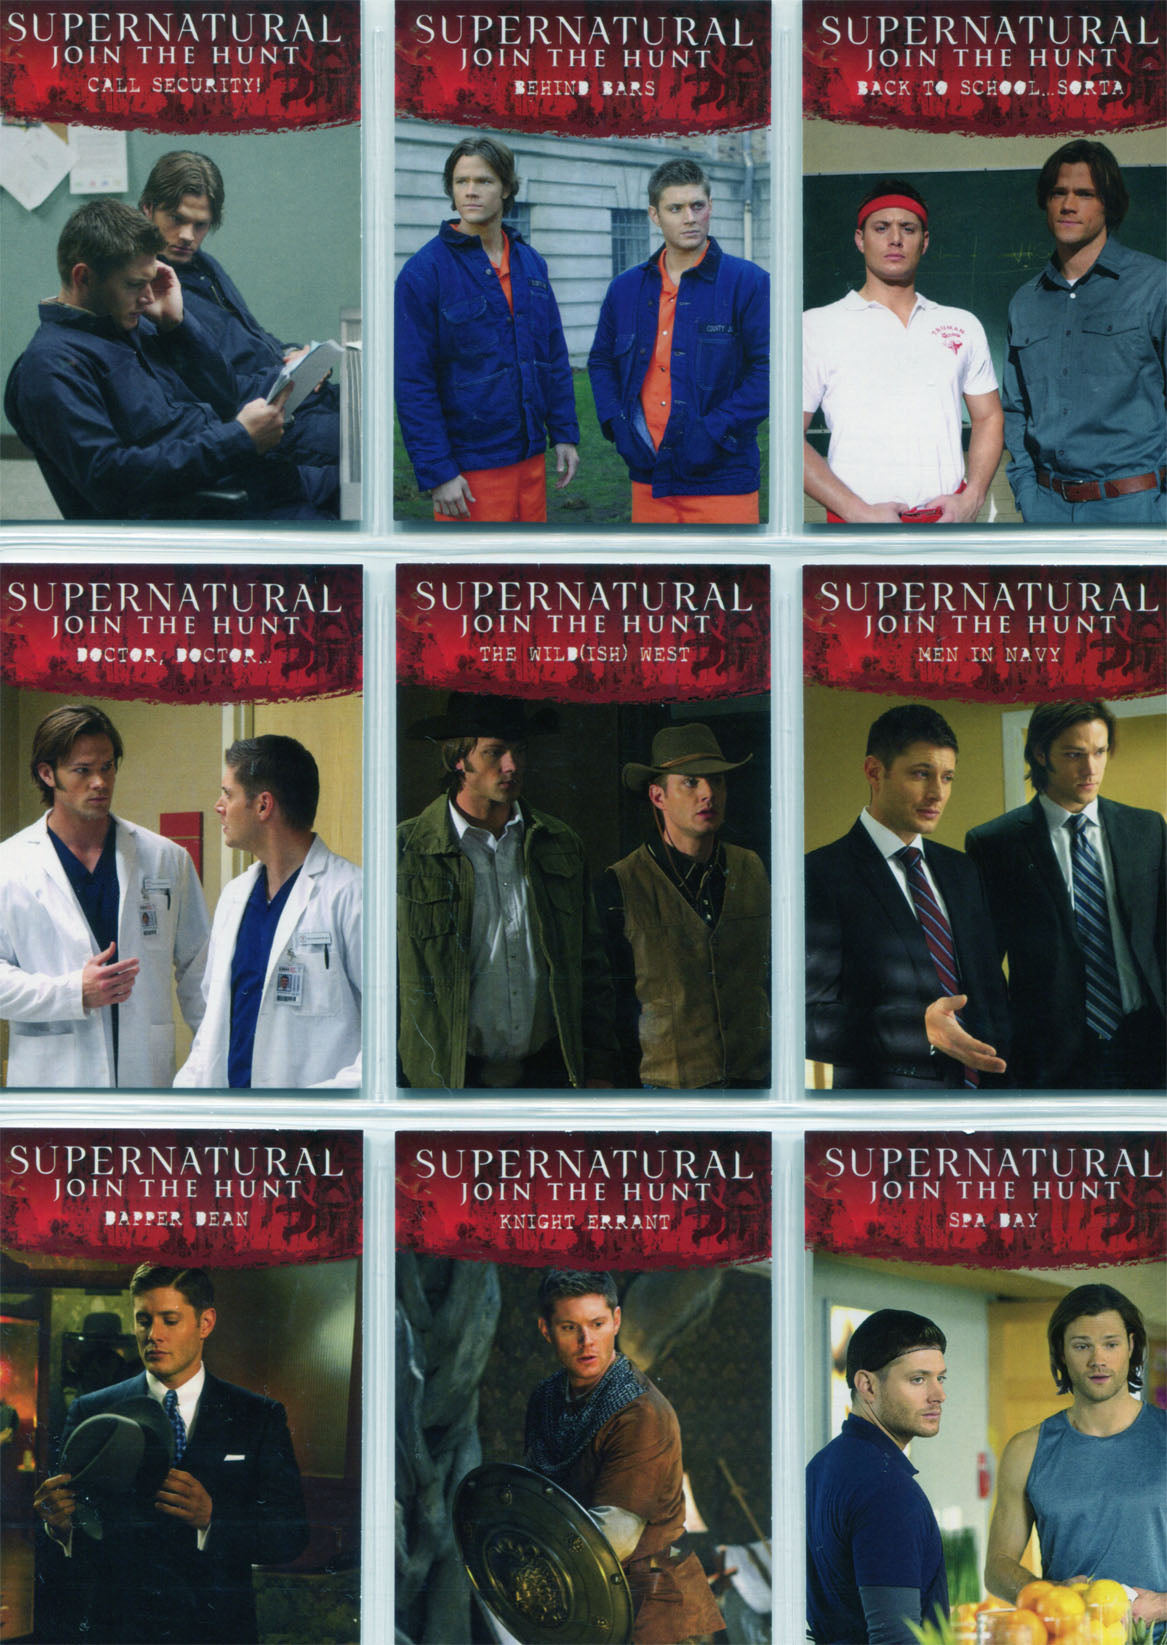 Supernatural Seasons 4 to 6 Disguises Complete 9 Chase Card Set D1 to D9